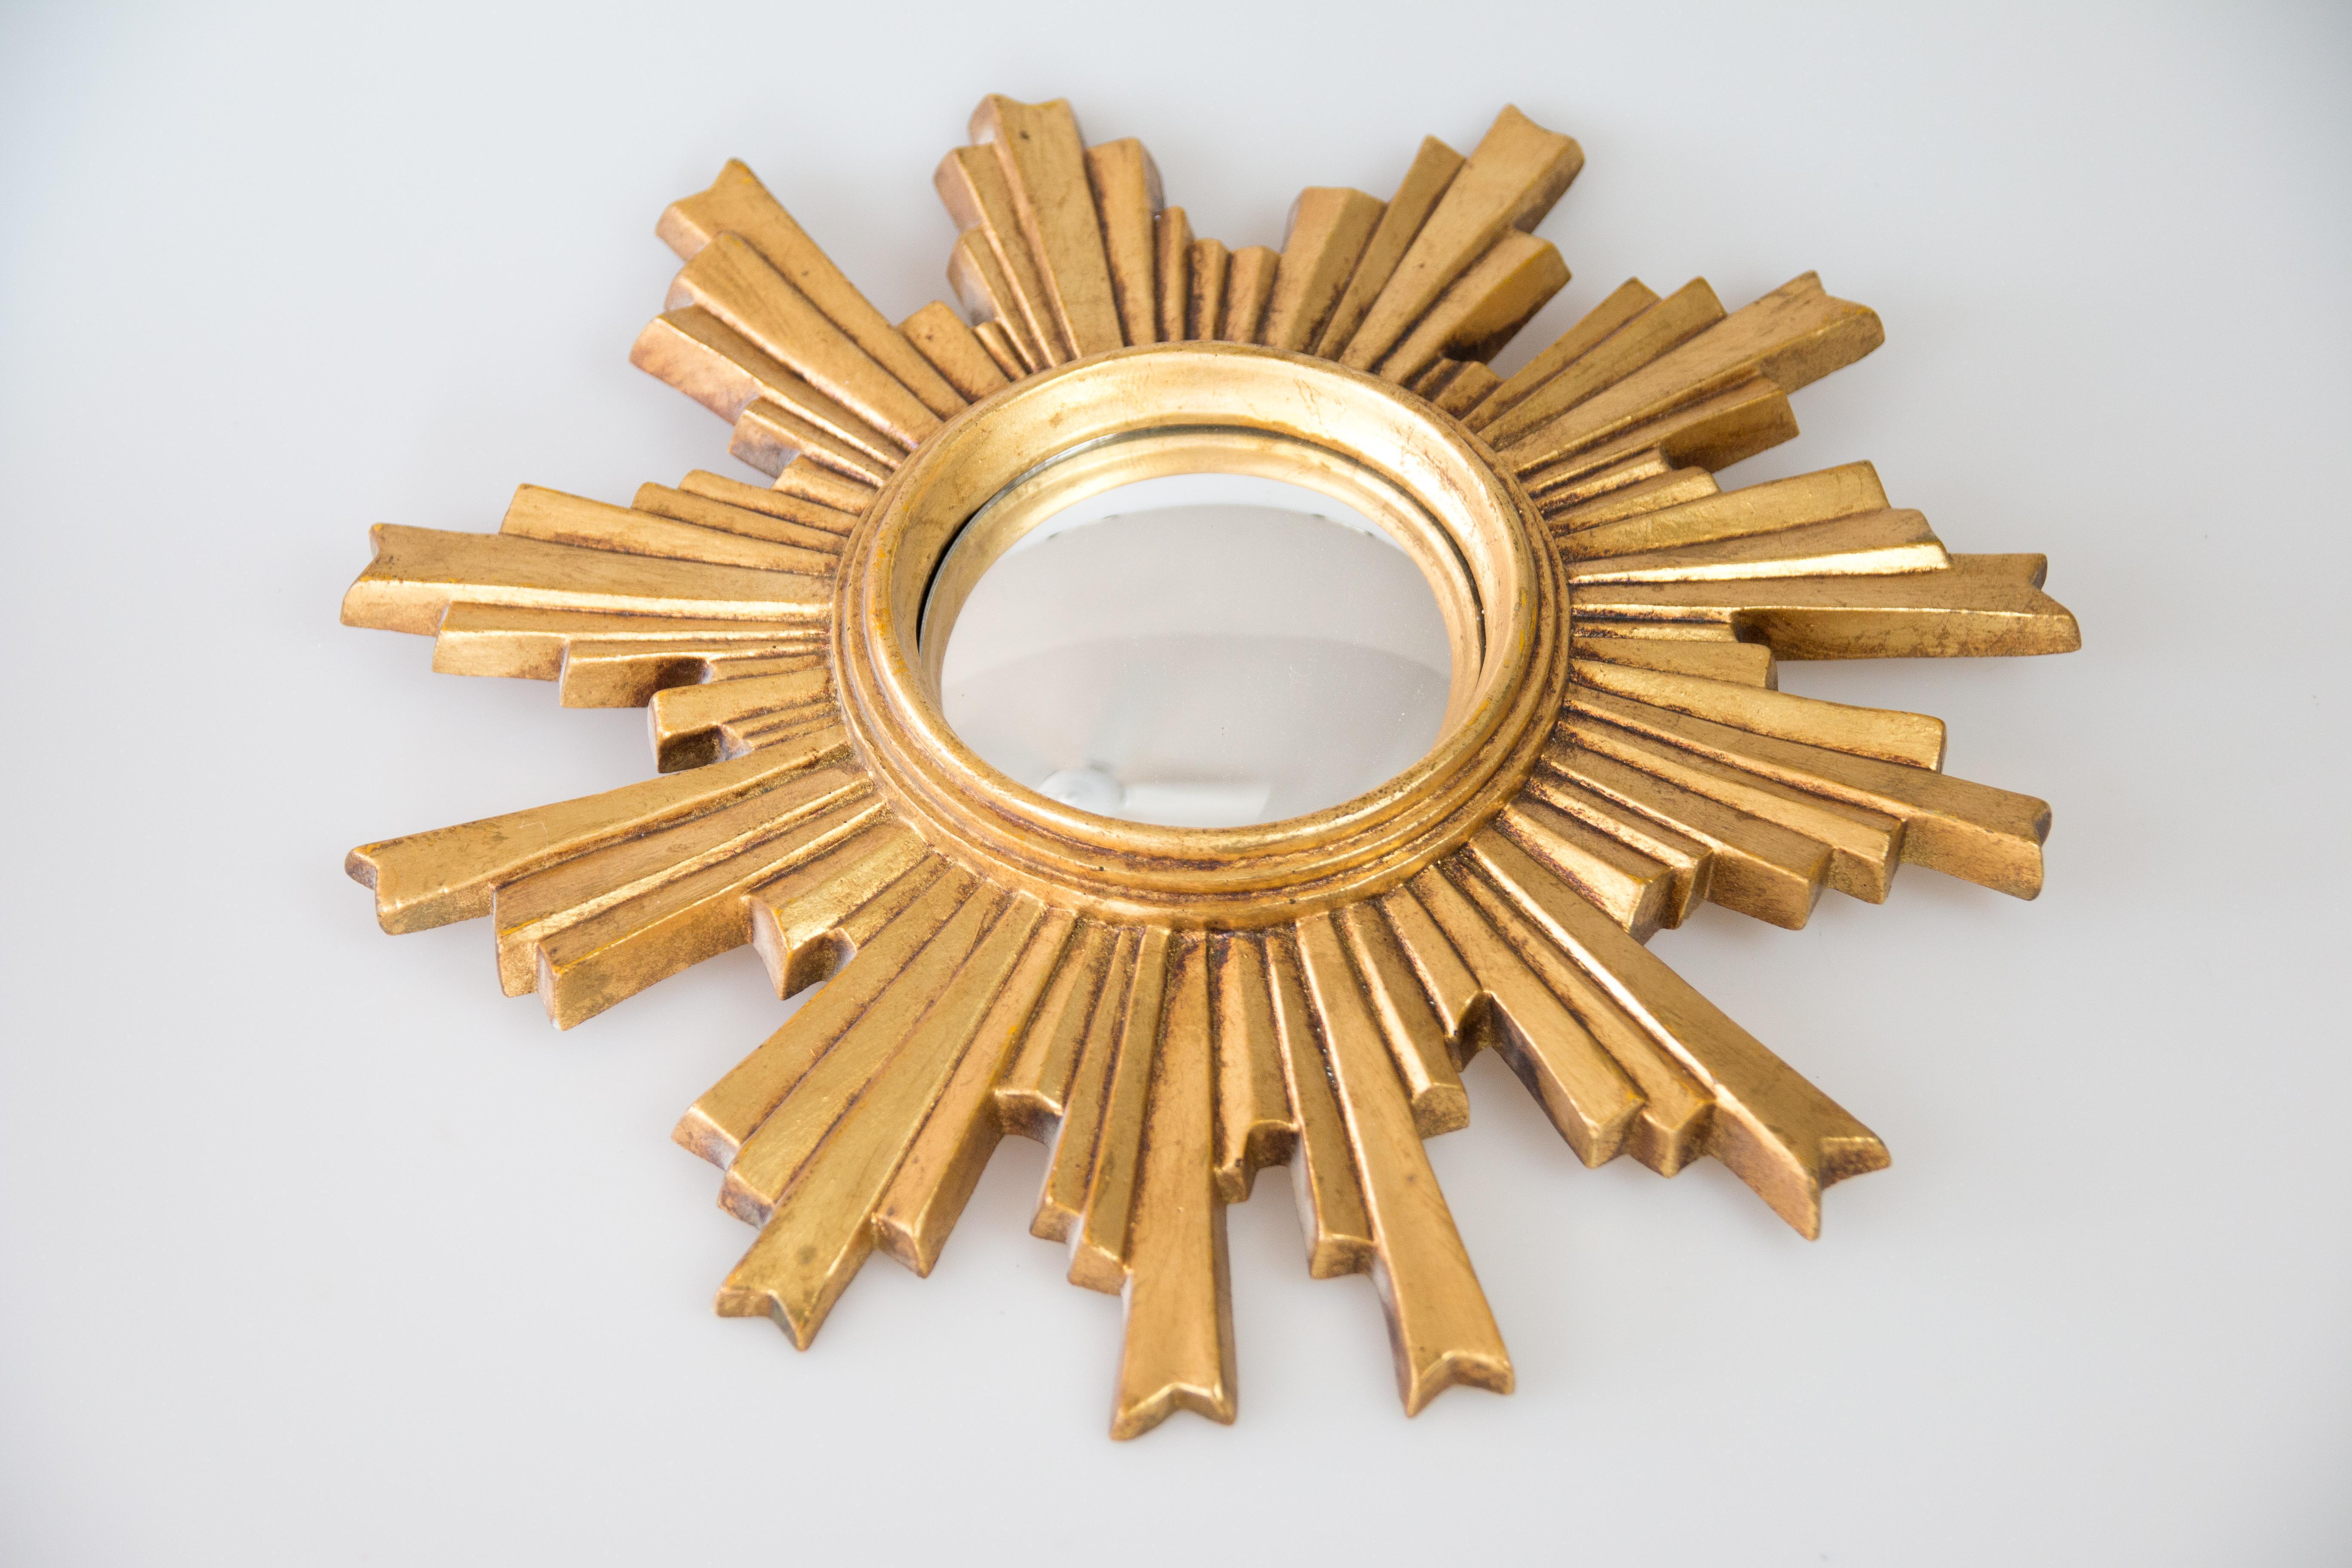 A stylish Mid 20th-Century French Art Deco style gilt resin sunburst mirror, circa 1960. It retains the original convex mirror which is surrounded by lovely rays of alternating lengths with a beautiful patina.

DIMENSIONS
14ʺW × 1.75ʺD × 14ʺH

